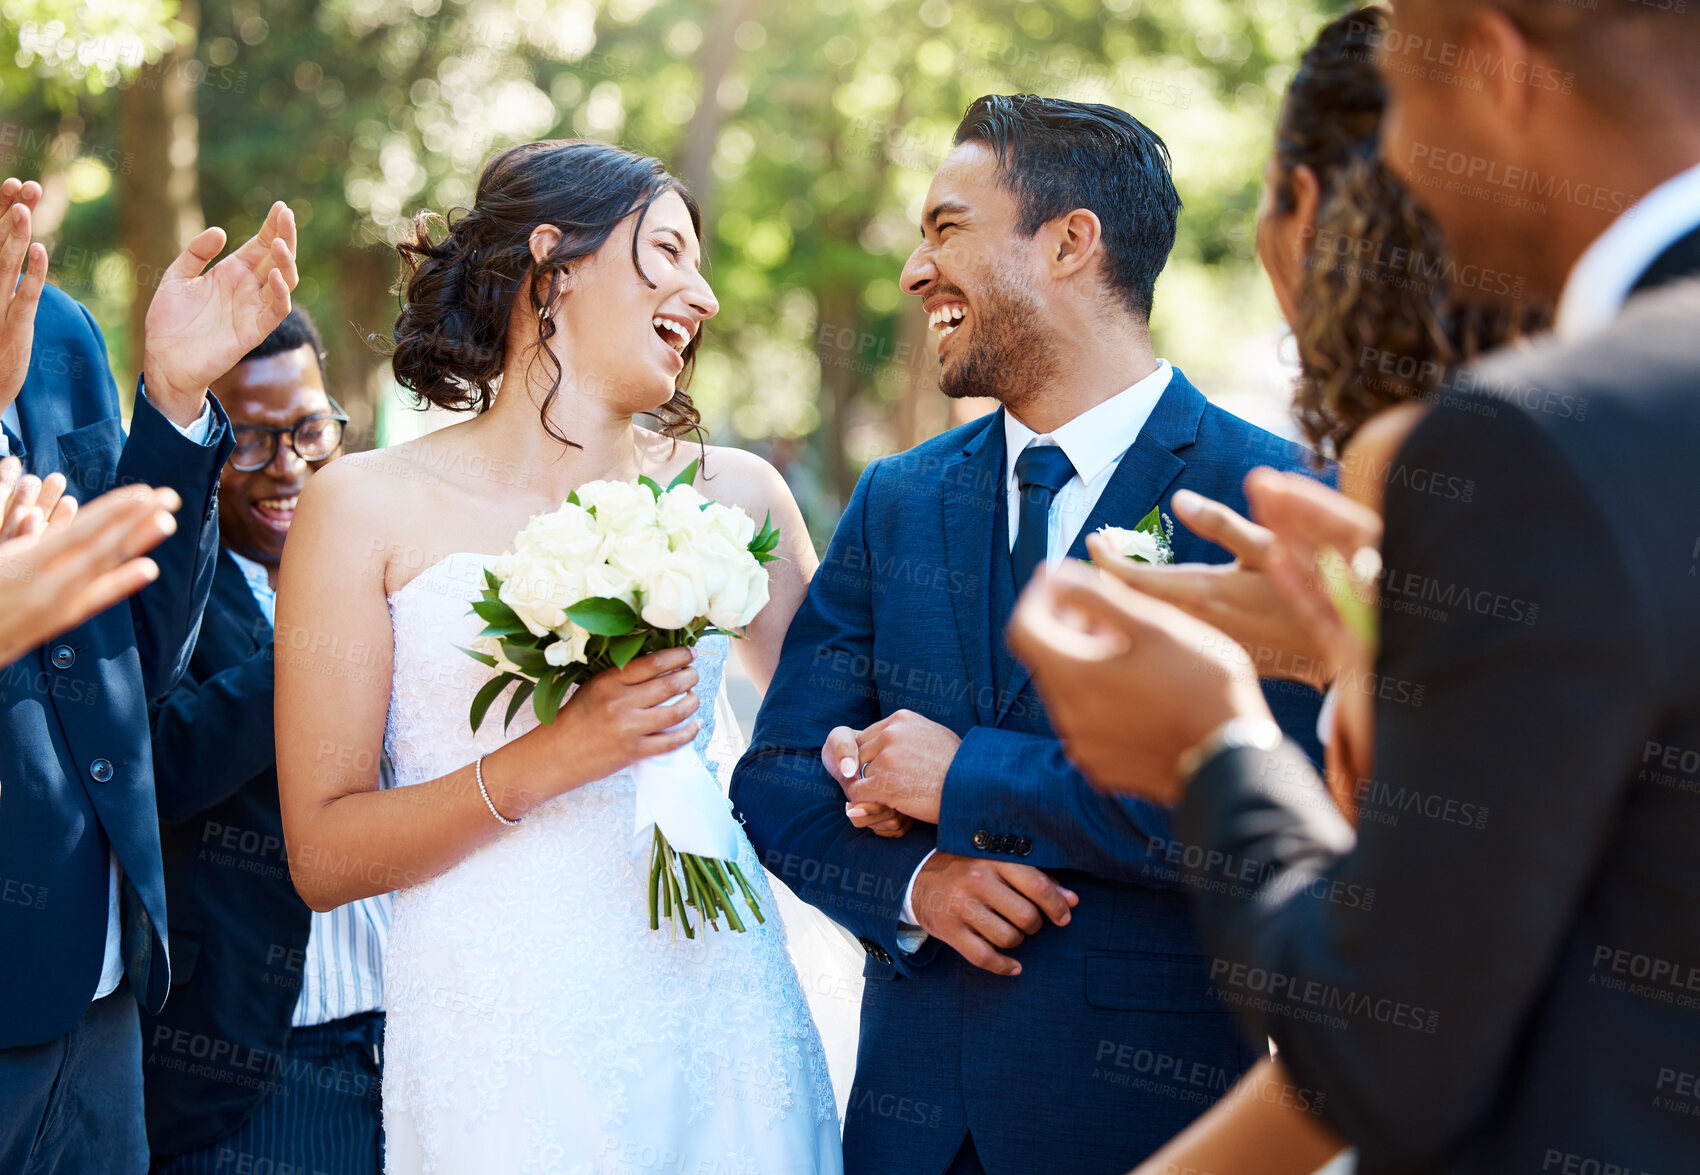 Buy stock photo Wedding ceremony, couple and people clapping hands in celebration of love, romance and union. Happy, smile and bride with bouquet and groom walking by guests cheering for marriage at an outdoor event